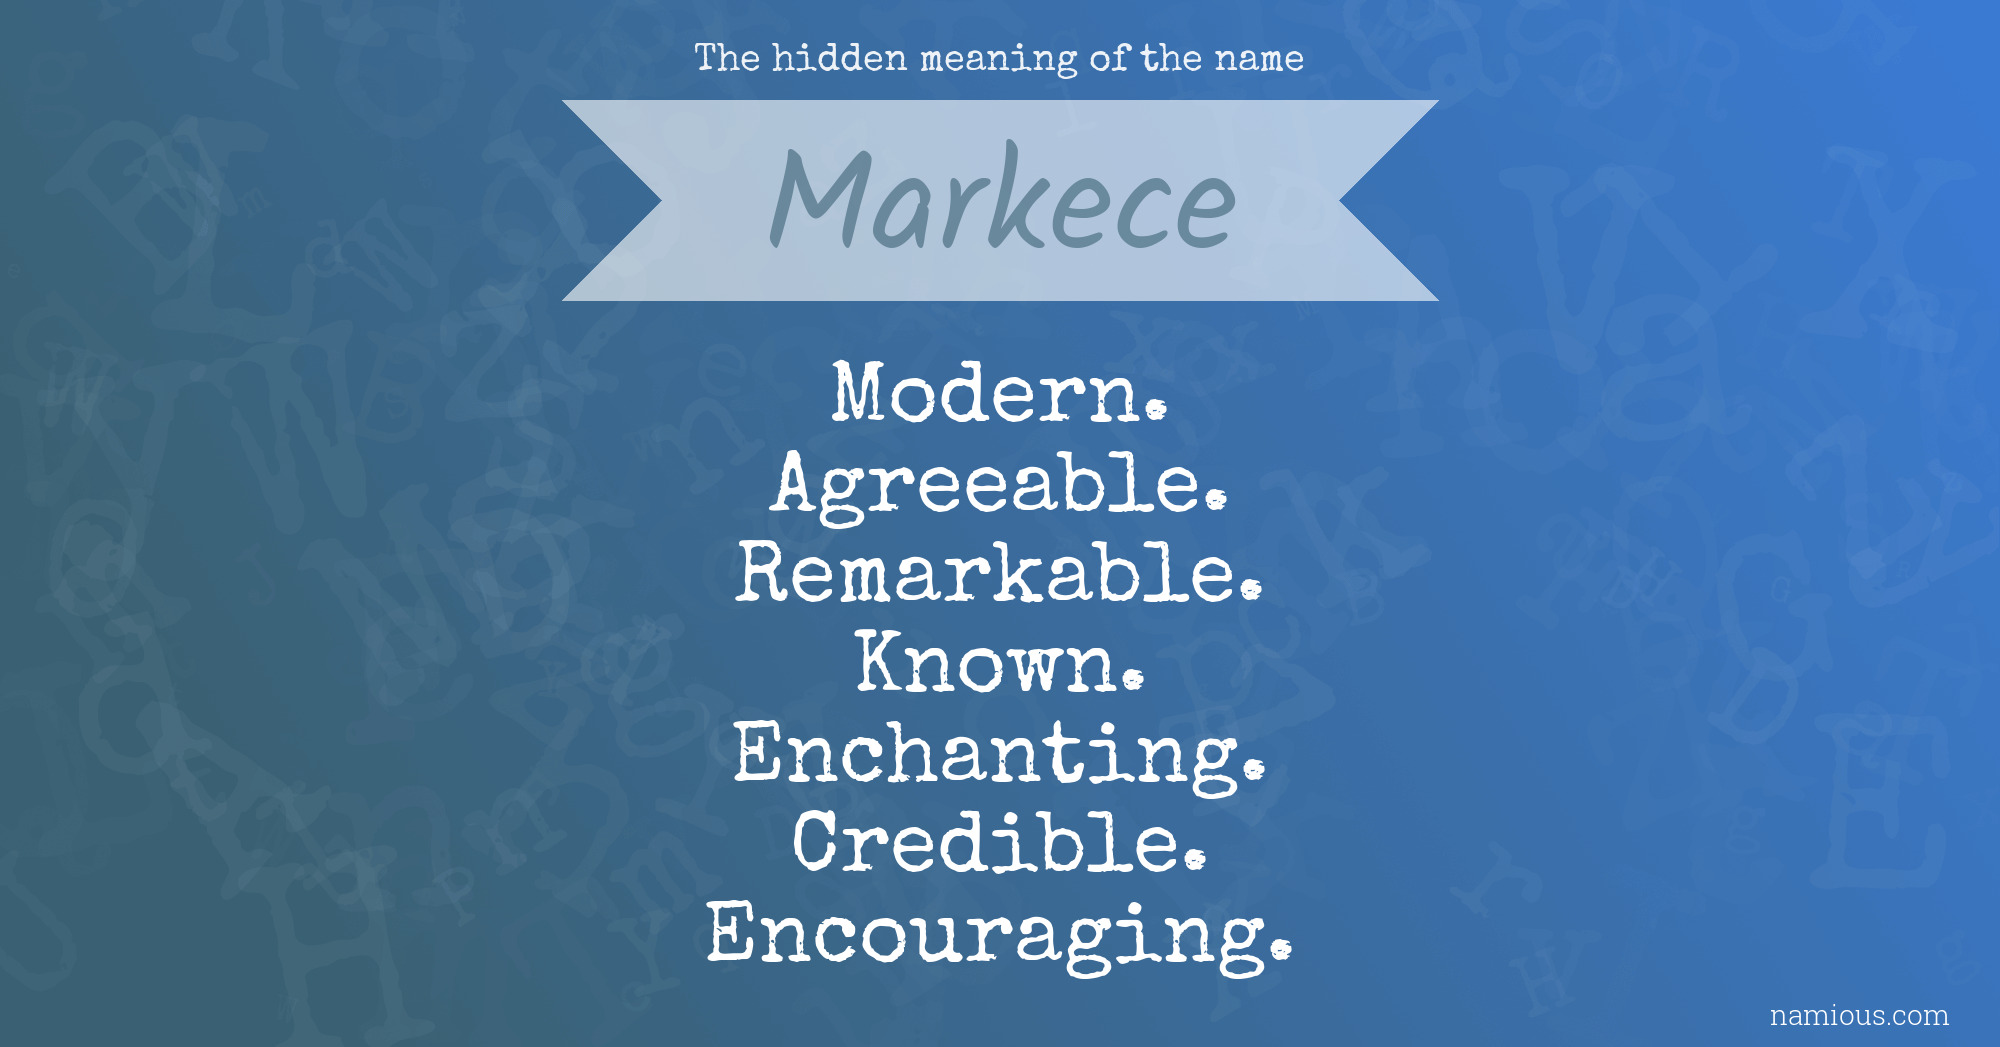 The hidden meaning of the name Markece